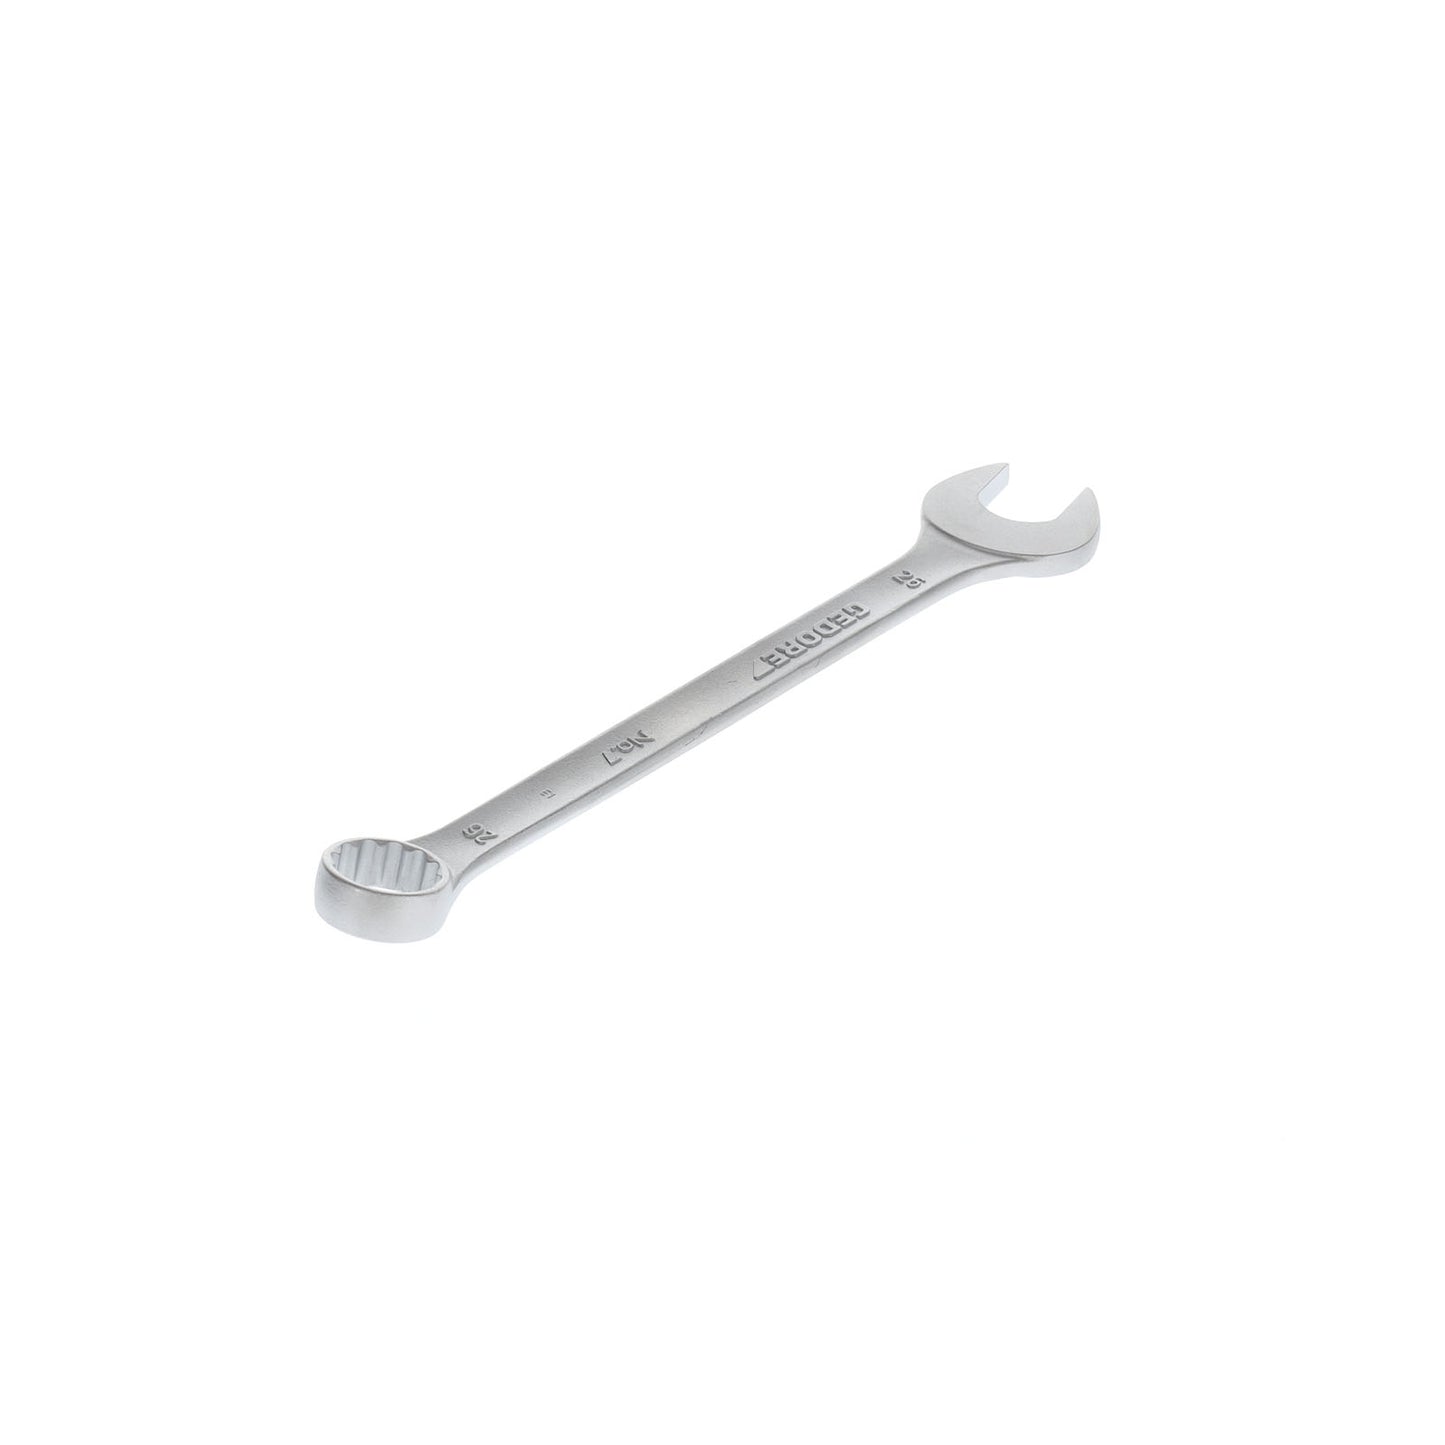 GEDORE 7 26 - Combination Wrench, 26 mm (6092420)